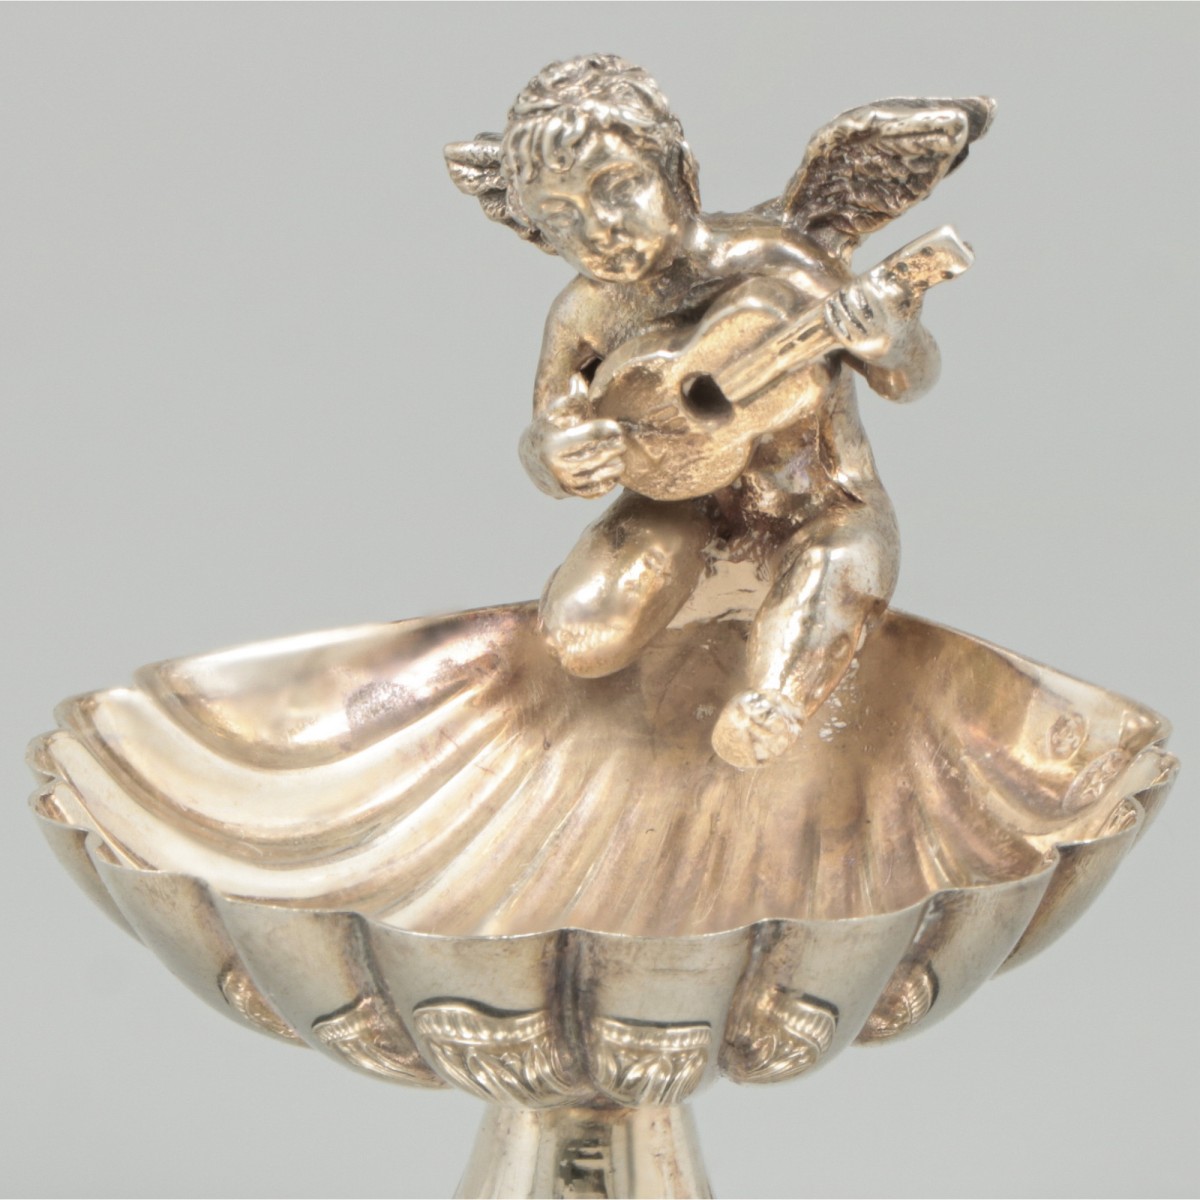 Salt cellar with spoon of silver. - Image 2 of 6